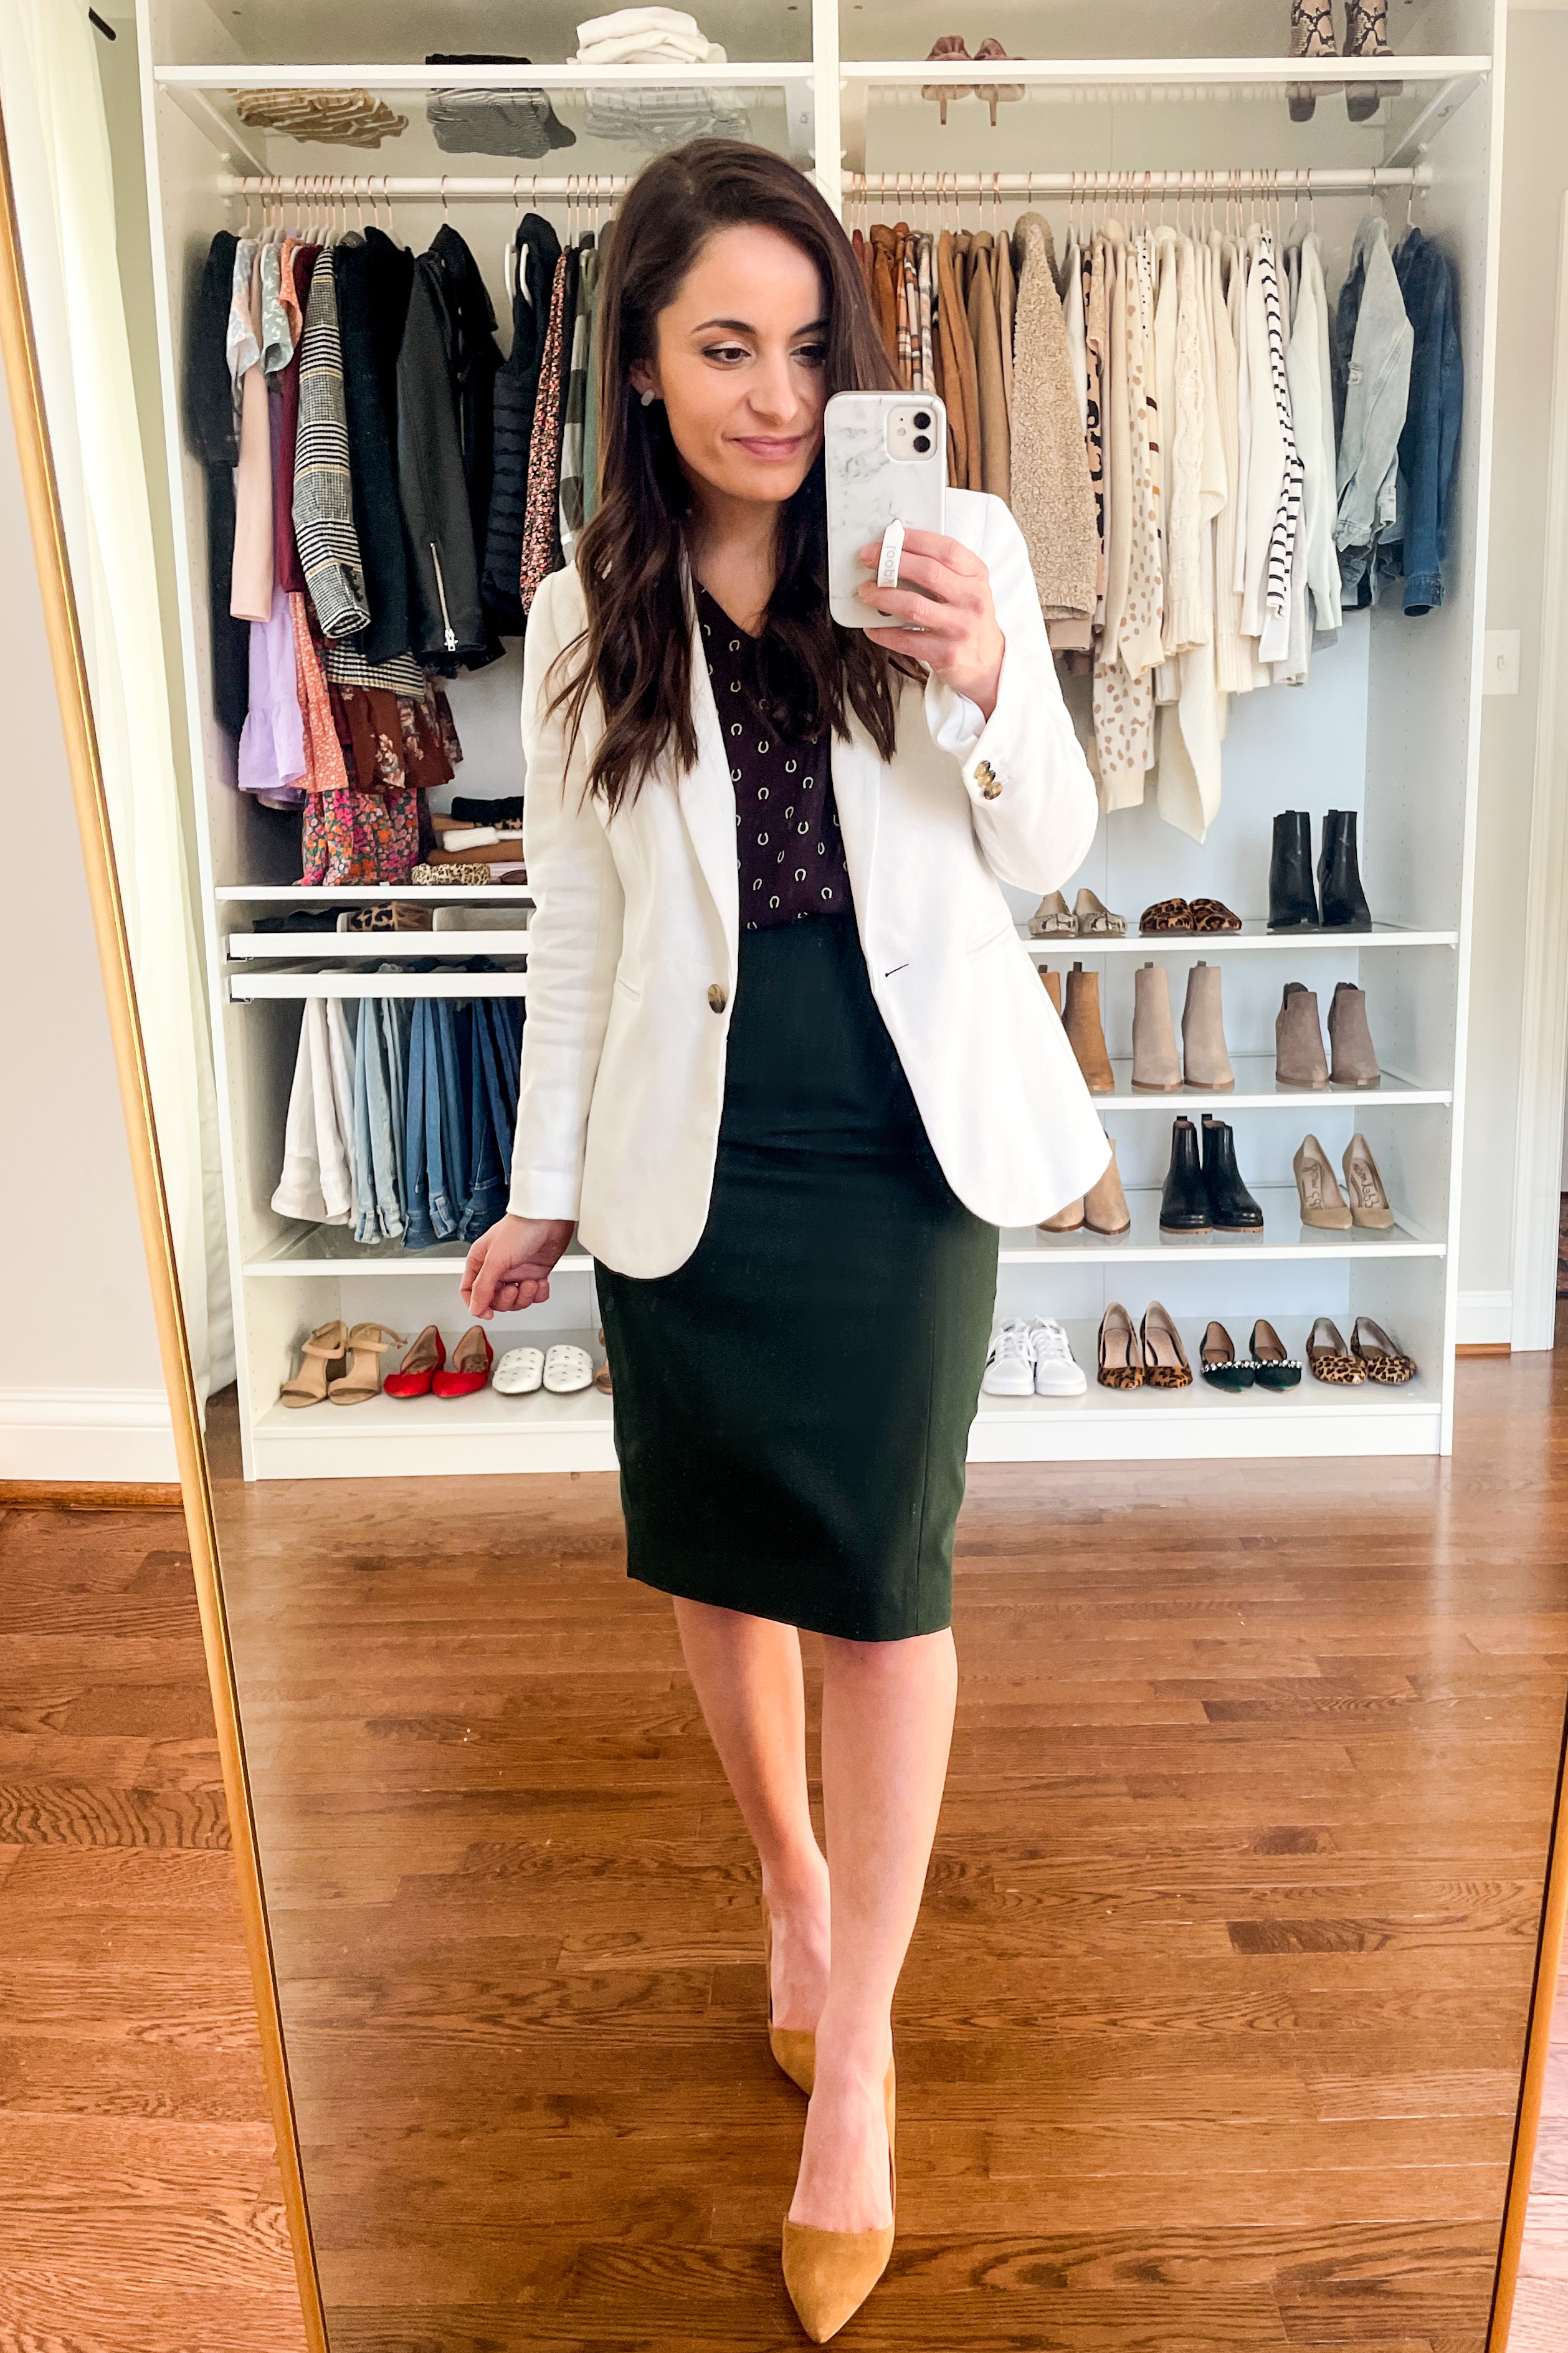 10 Items 20 Outfits for Work - Pumps \u0026 Push Ups